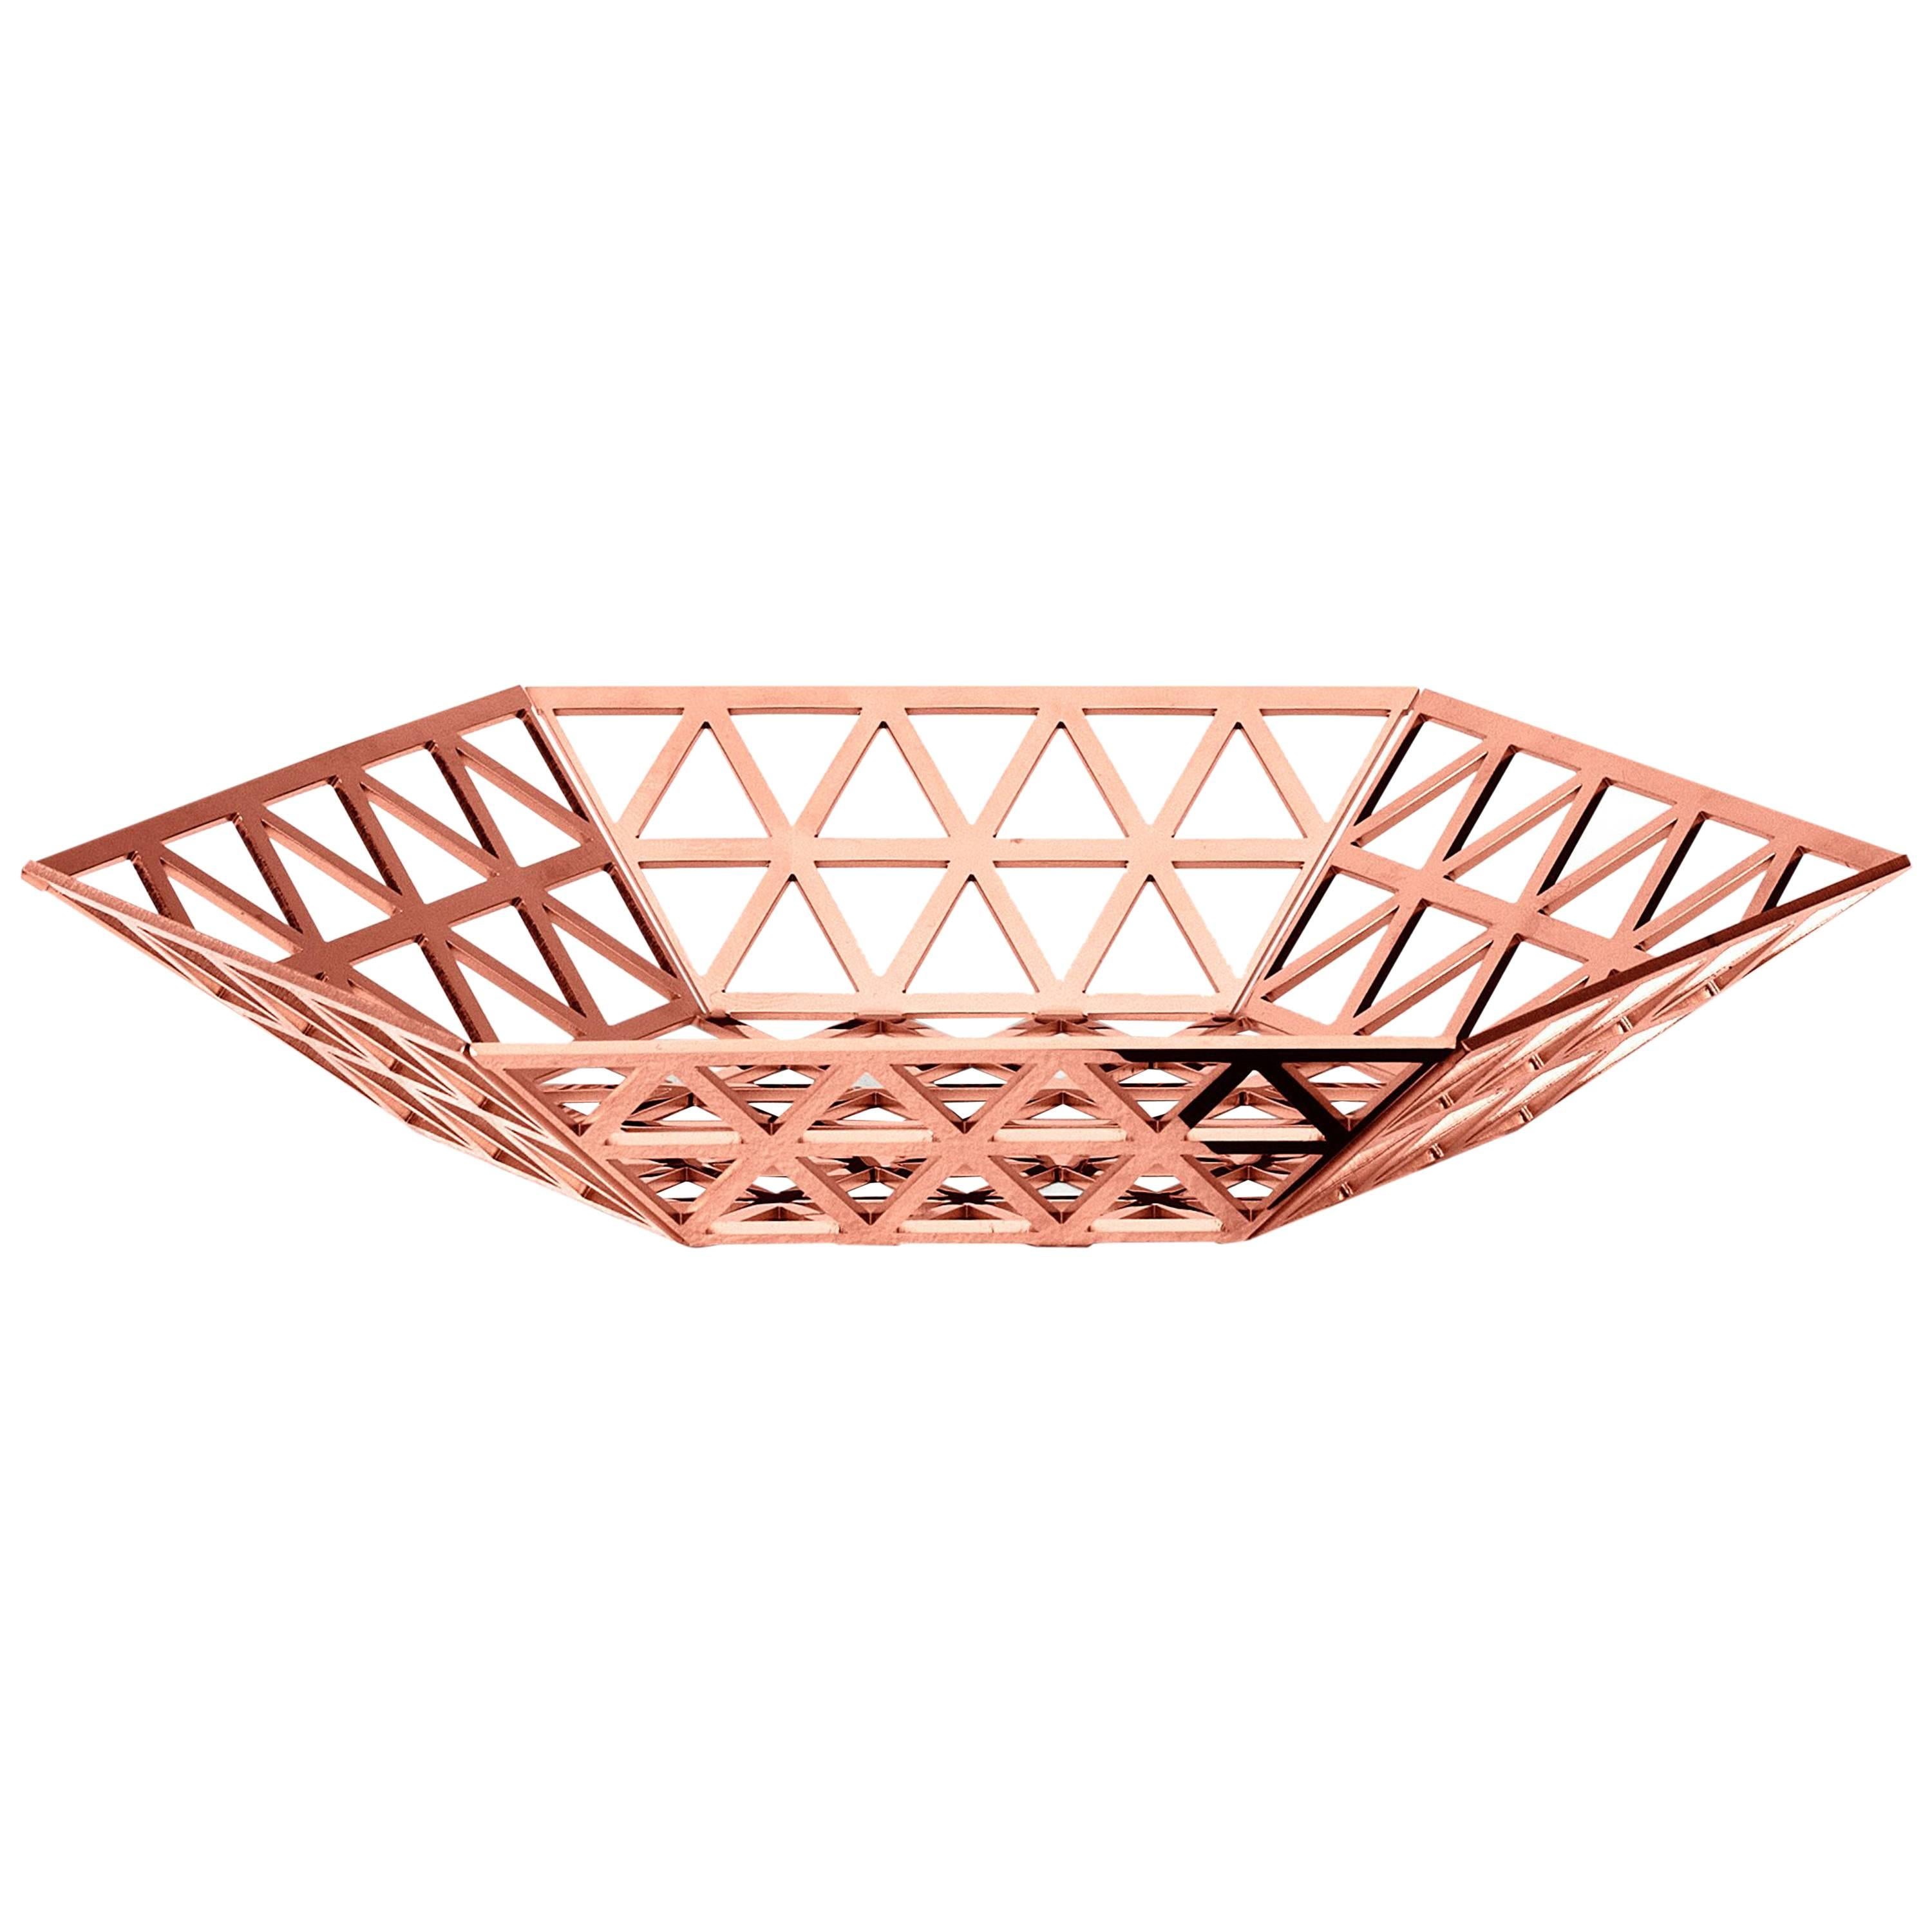 Ghidini 1961 Tip Top Flat Tray in Rose Gold Finish